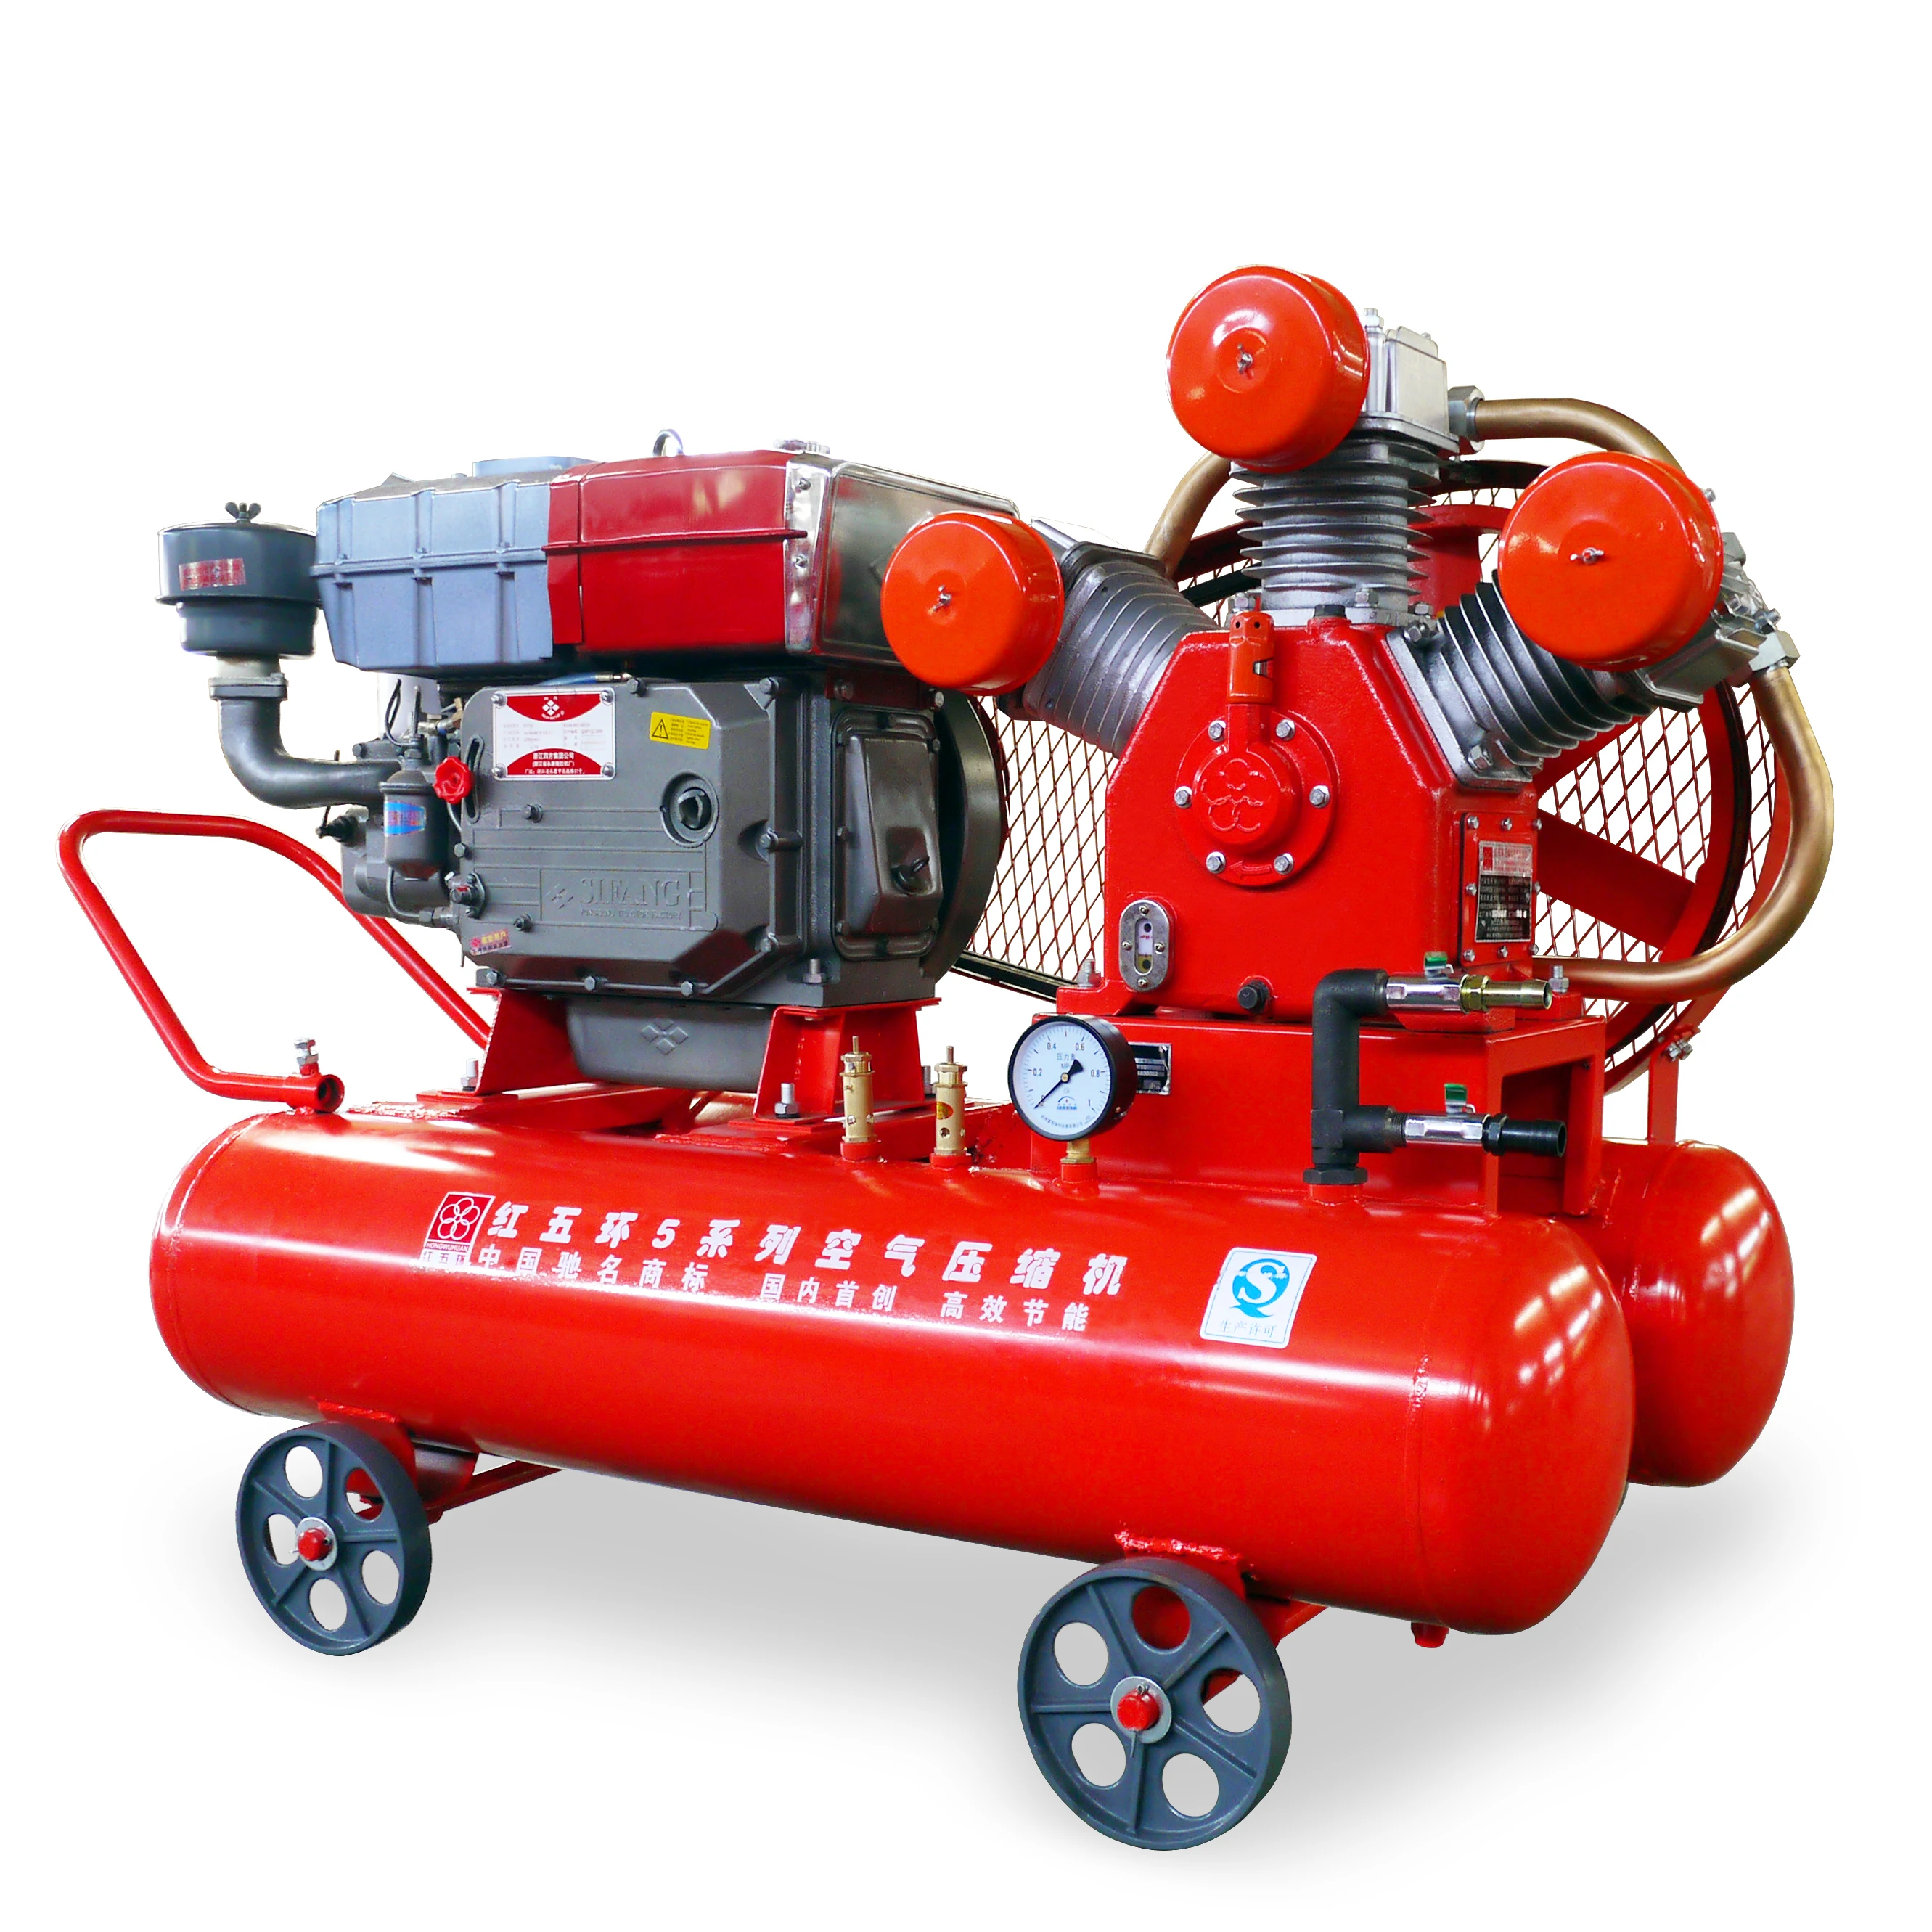 Hongwuhuan 5 Bar Diesel Engine Portable Used 100cfm Piston Mining Air Compressors with Jack Hammer/Rock Drill Hammer